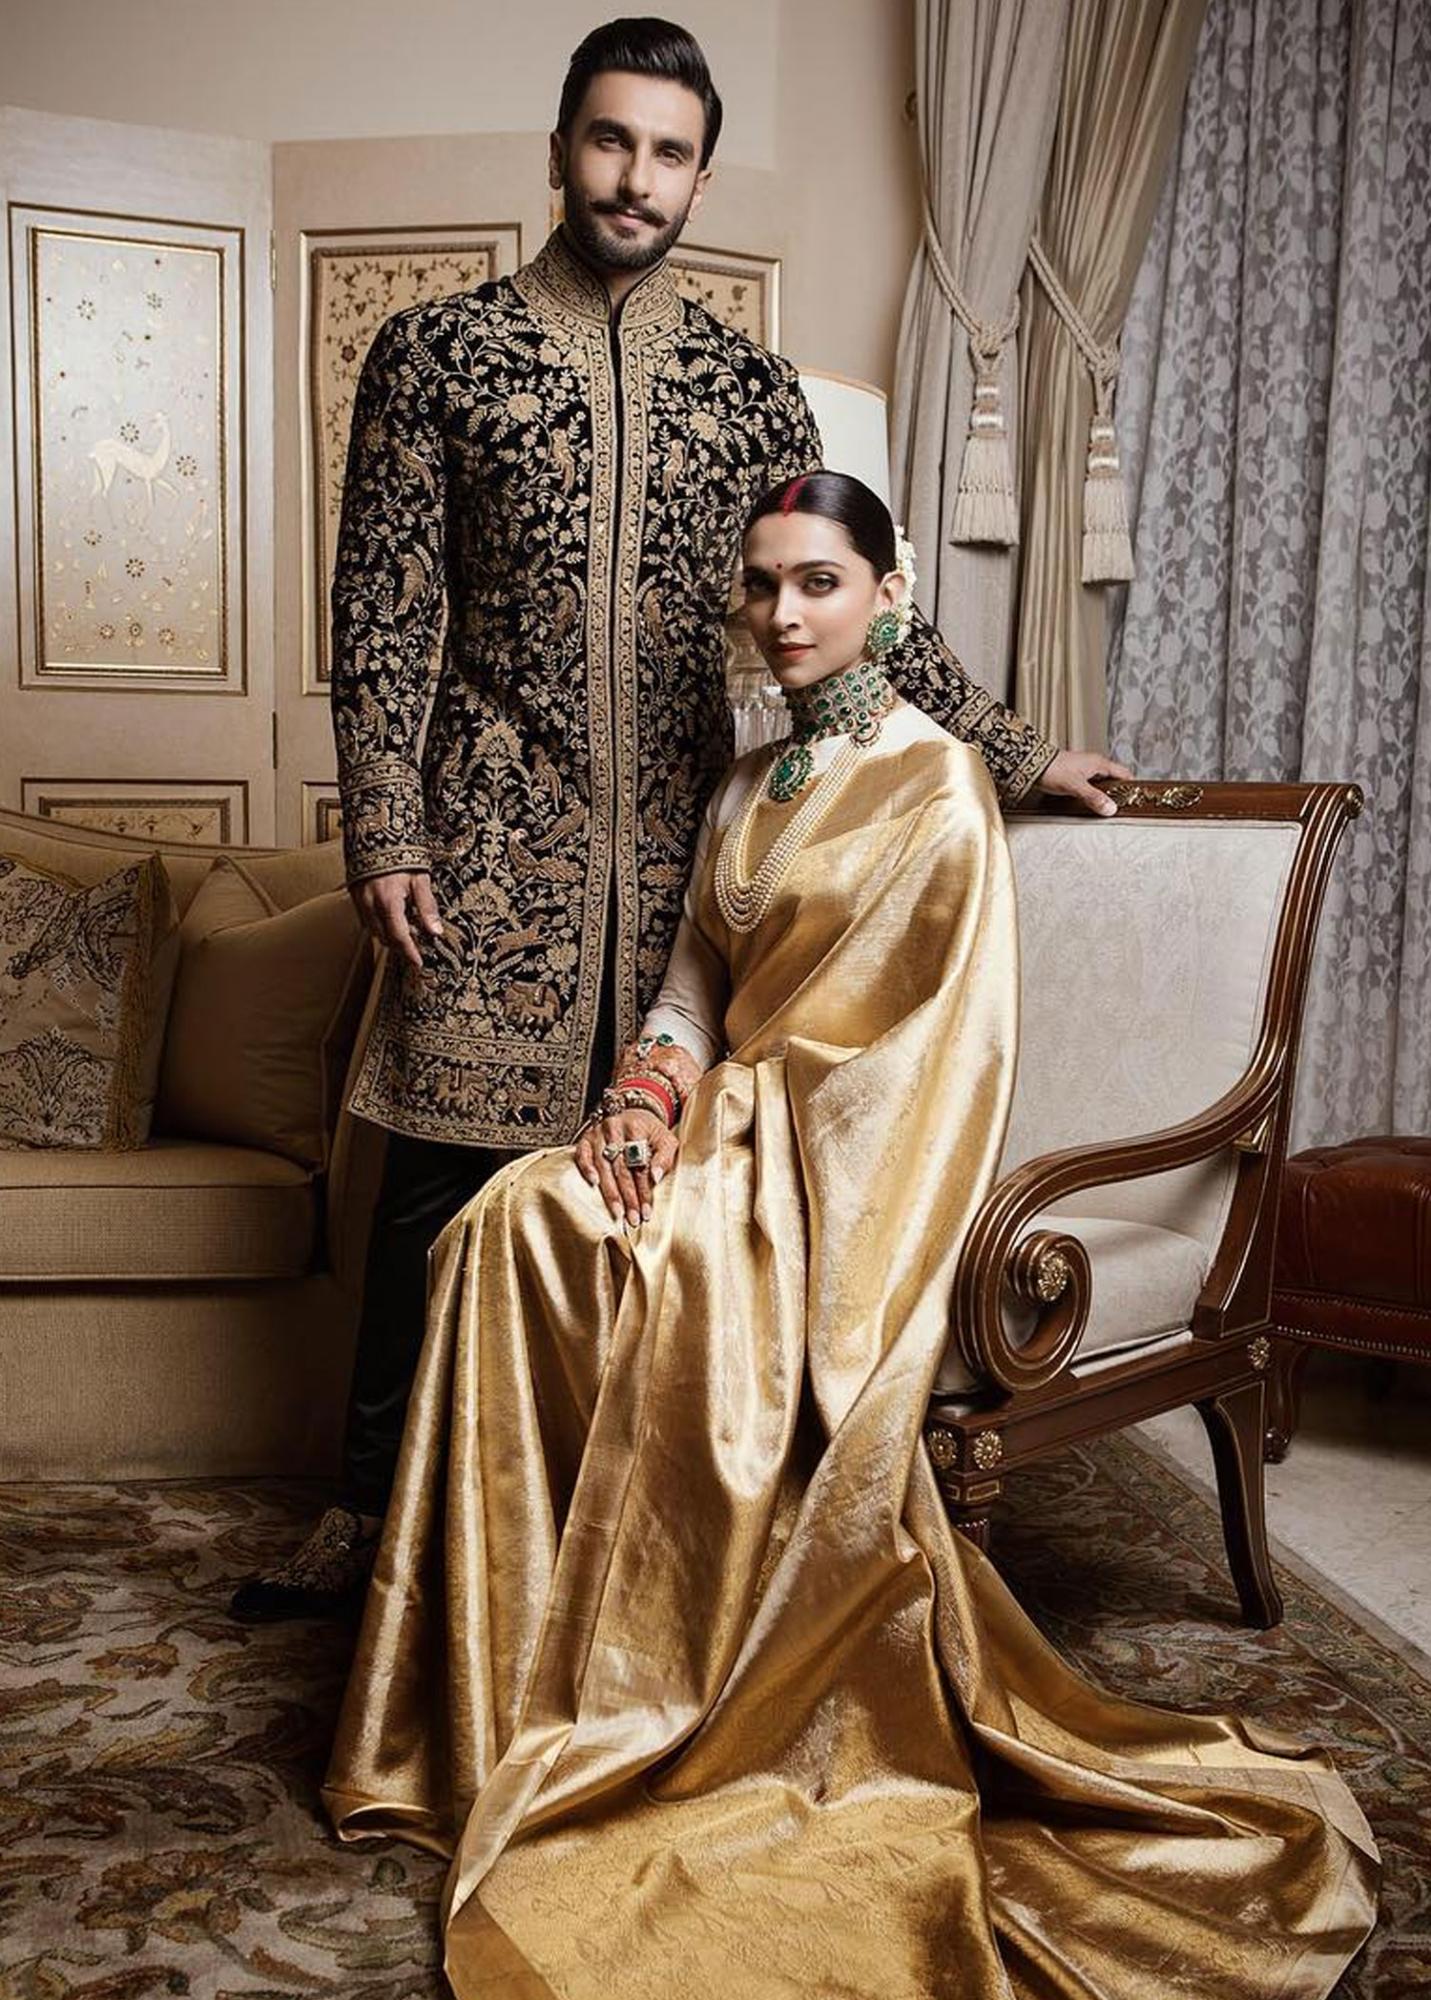 Deepika Padukone On One Year Of Marriage Says Her And Ranveer Have Their Own Identities Masala